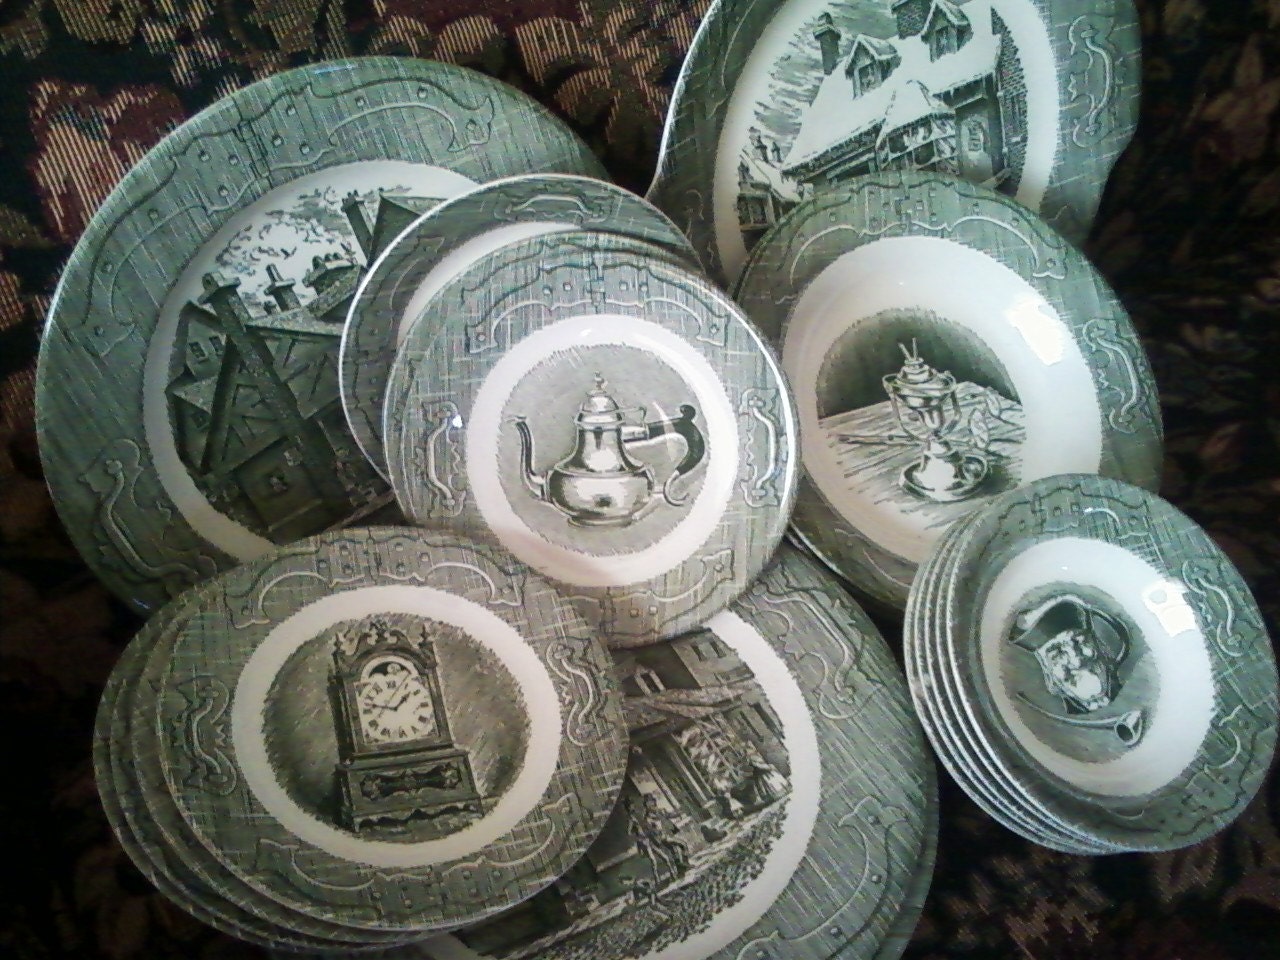 The Old Curiosity Shop Dishes